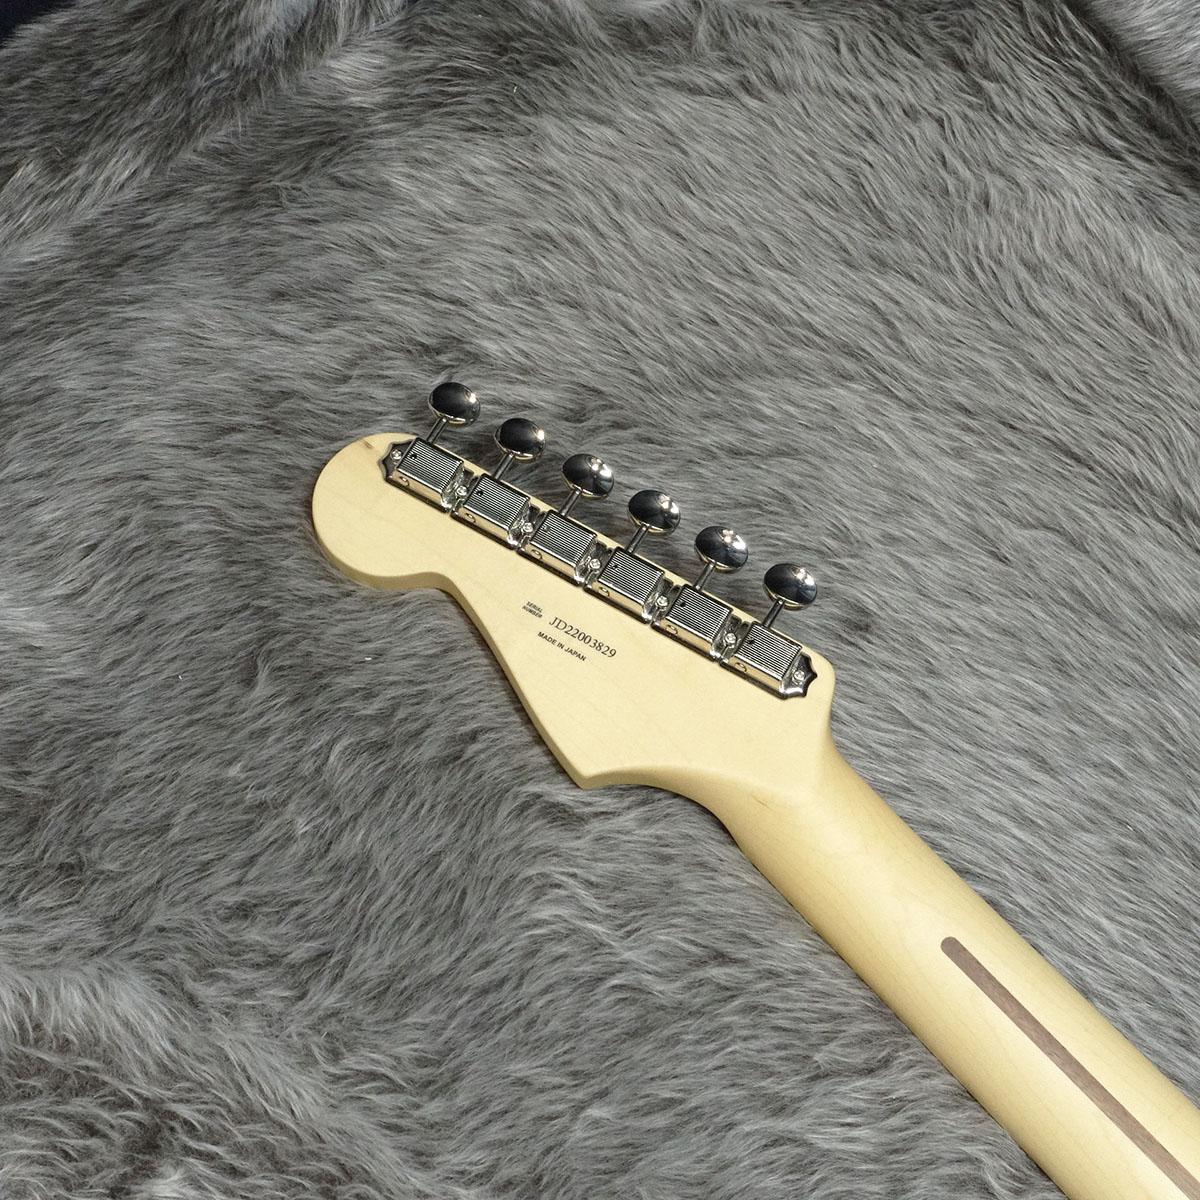 pericoloさん fender japan k\u0026t cry pickup - agence-immobiliere